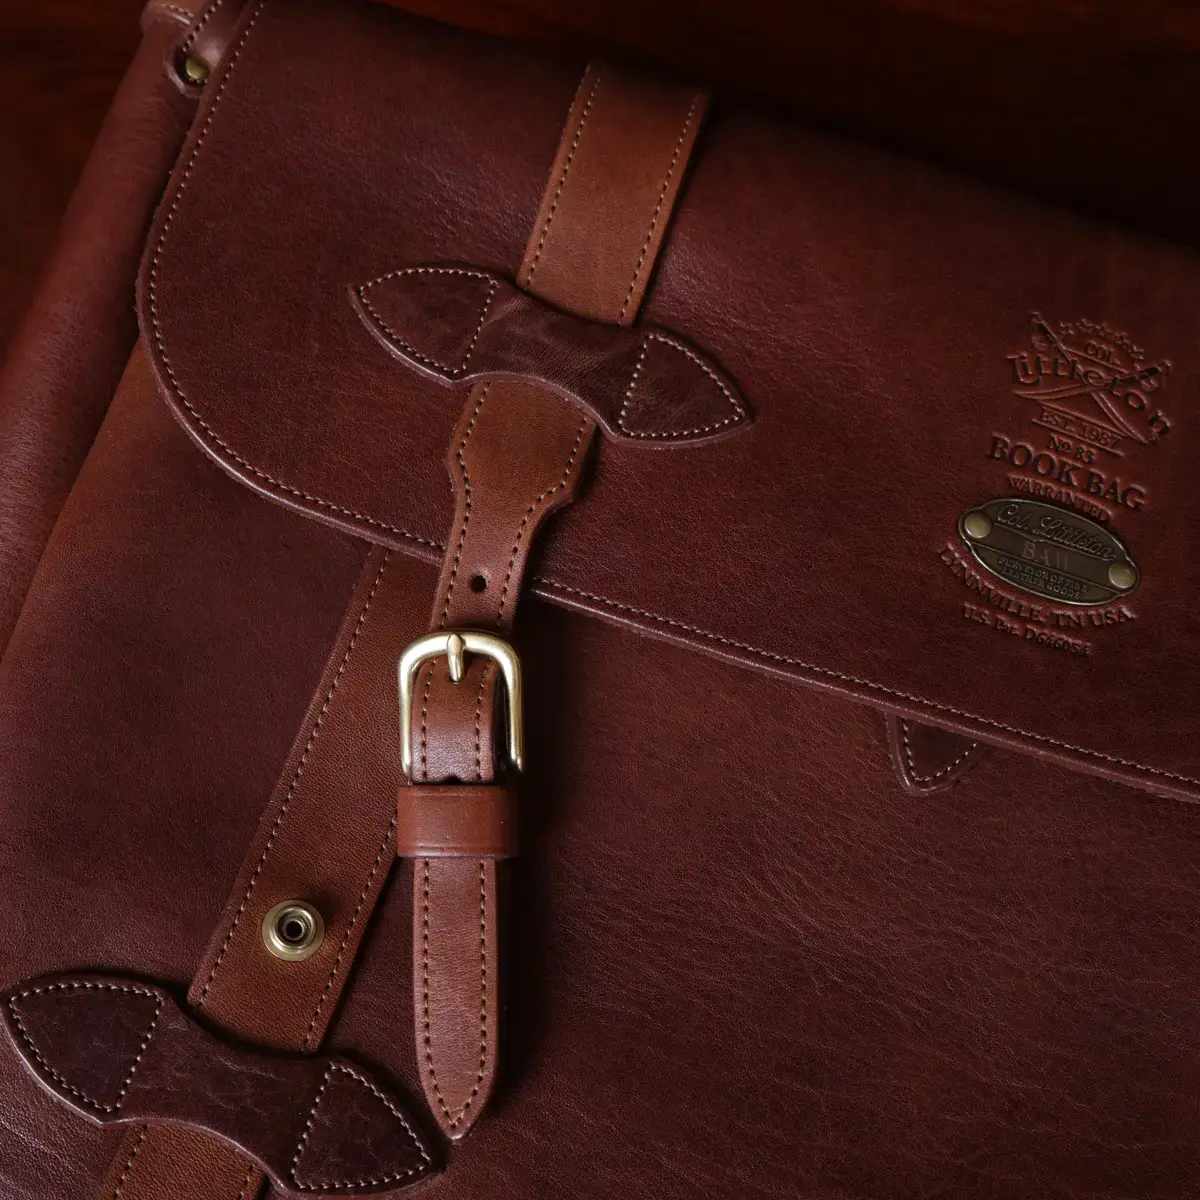 No 83 Messenger book back showing the clasp unbuttoned